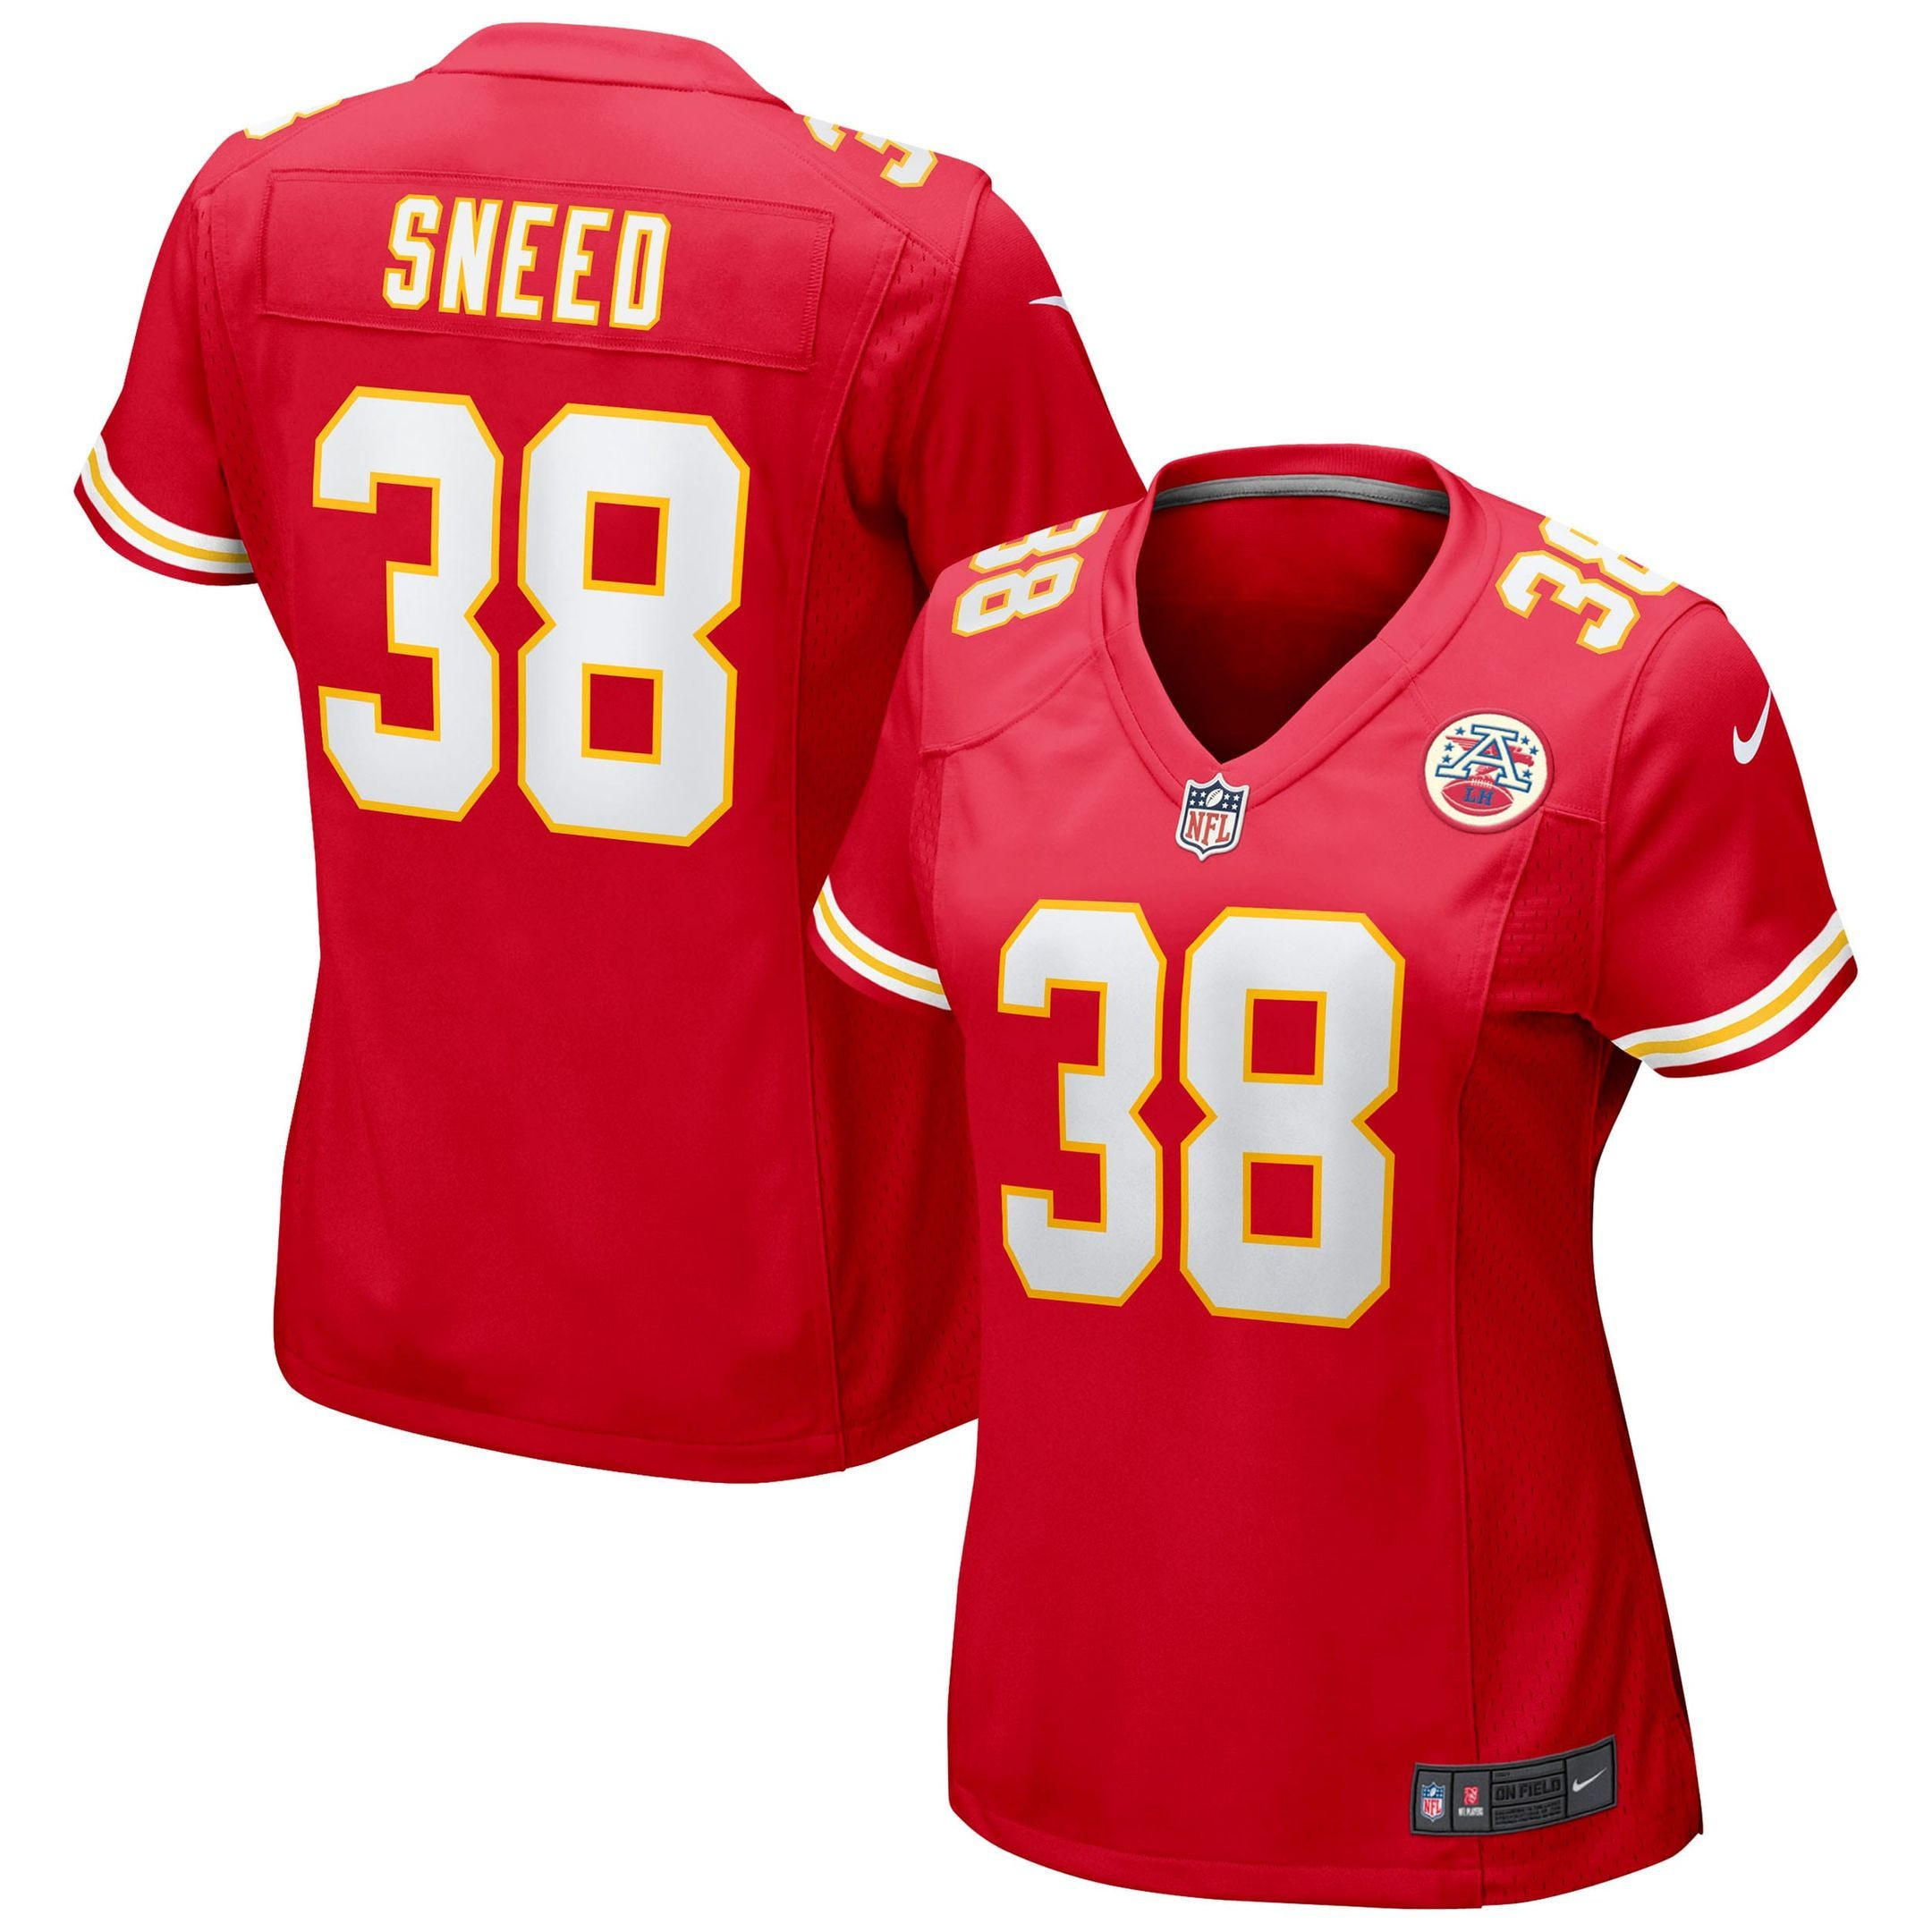 Womens Kansas City Chiefs LJarius Sneed Red Game Jersey Gift for Kansas City Chiefs fans